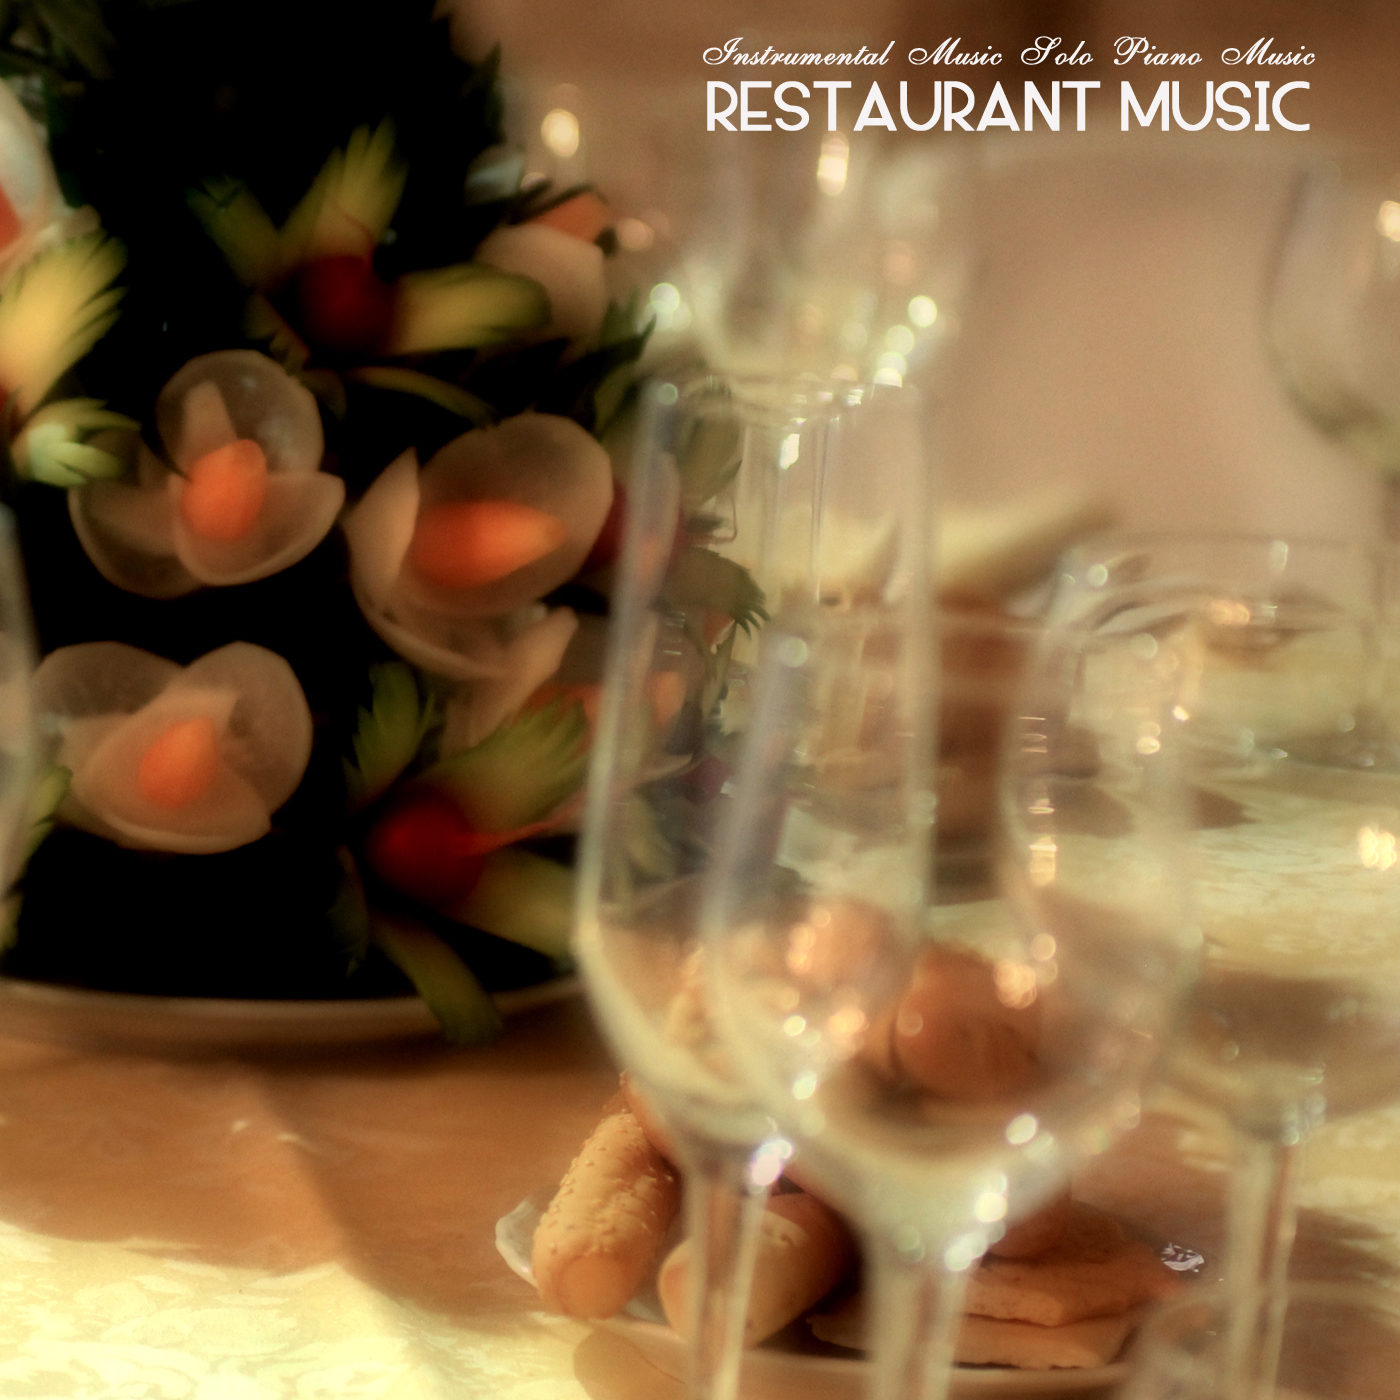 Restaurant Music - Solo Piano Music Edition, Instrumental Relaxing Background Music